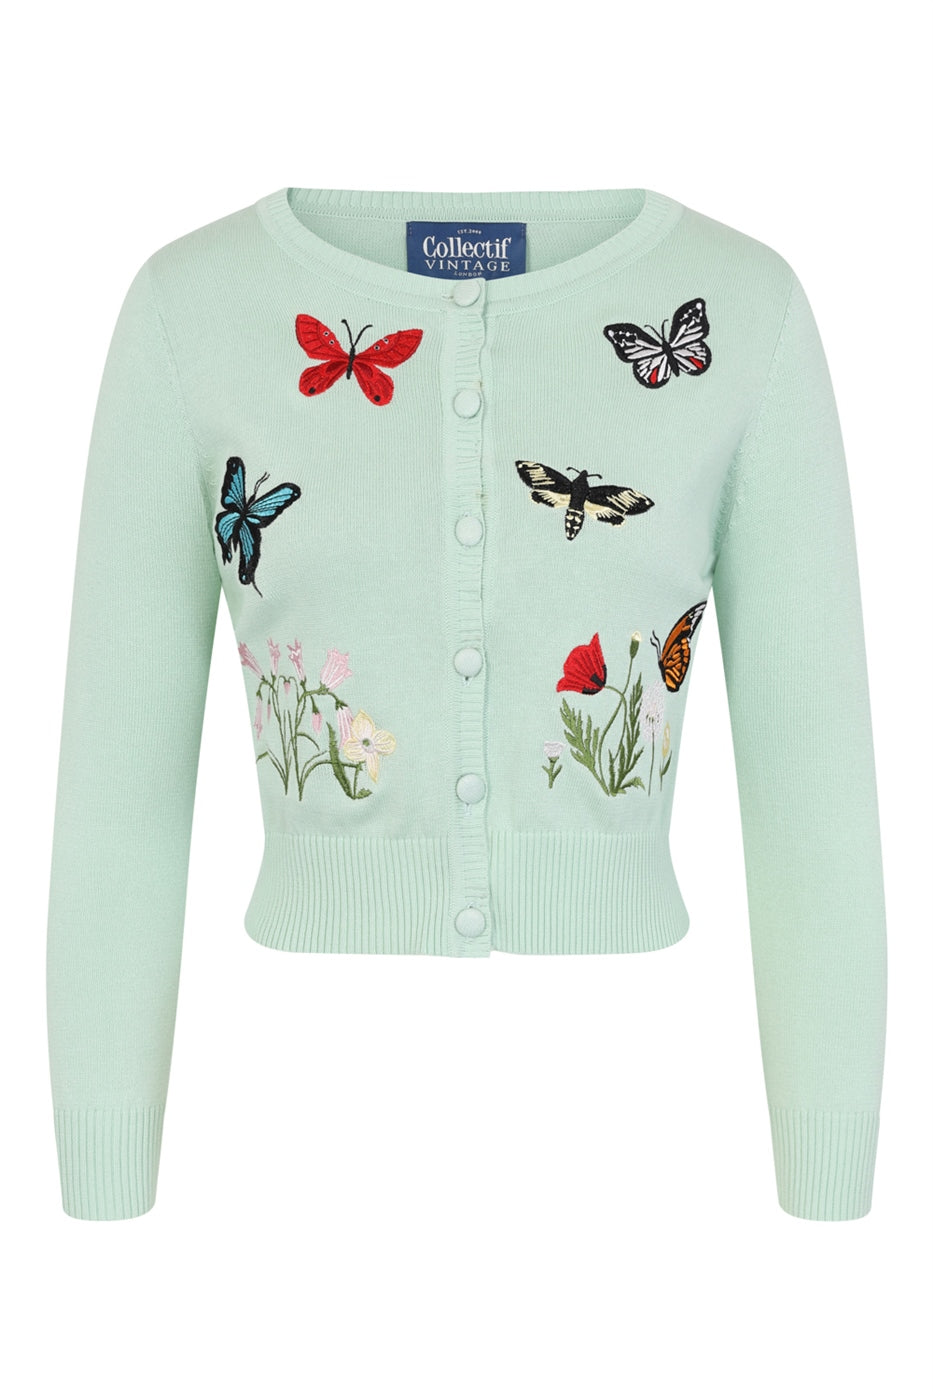 mint green coloured knitted cardigan with colourful embroidered butterflies on the front